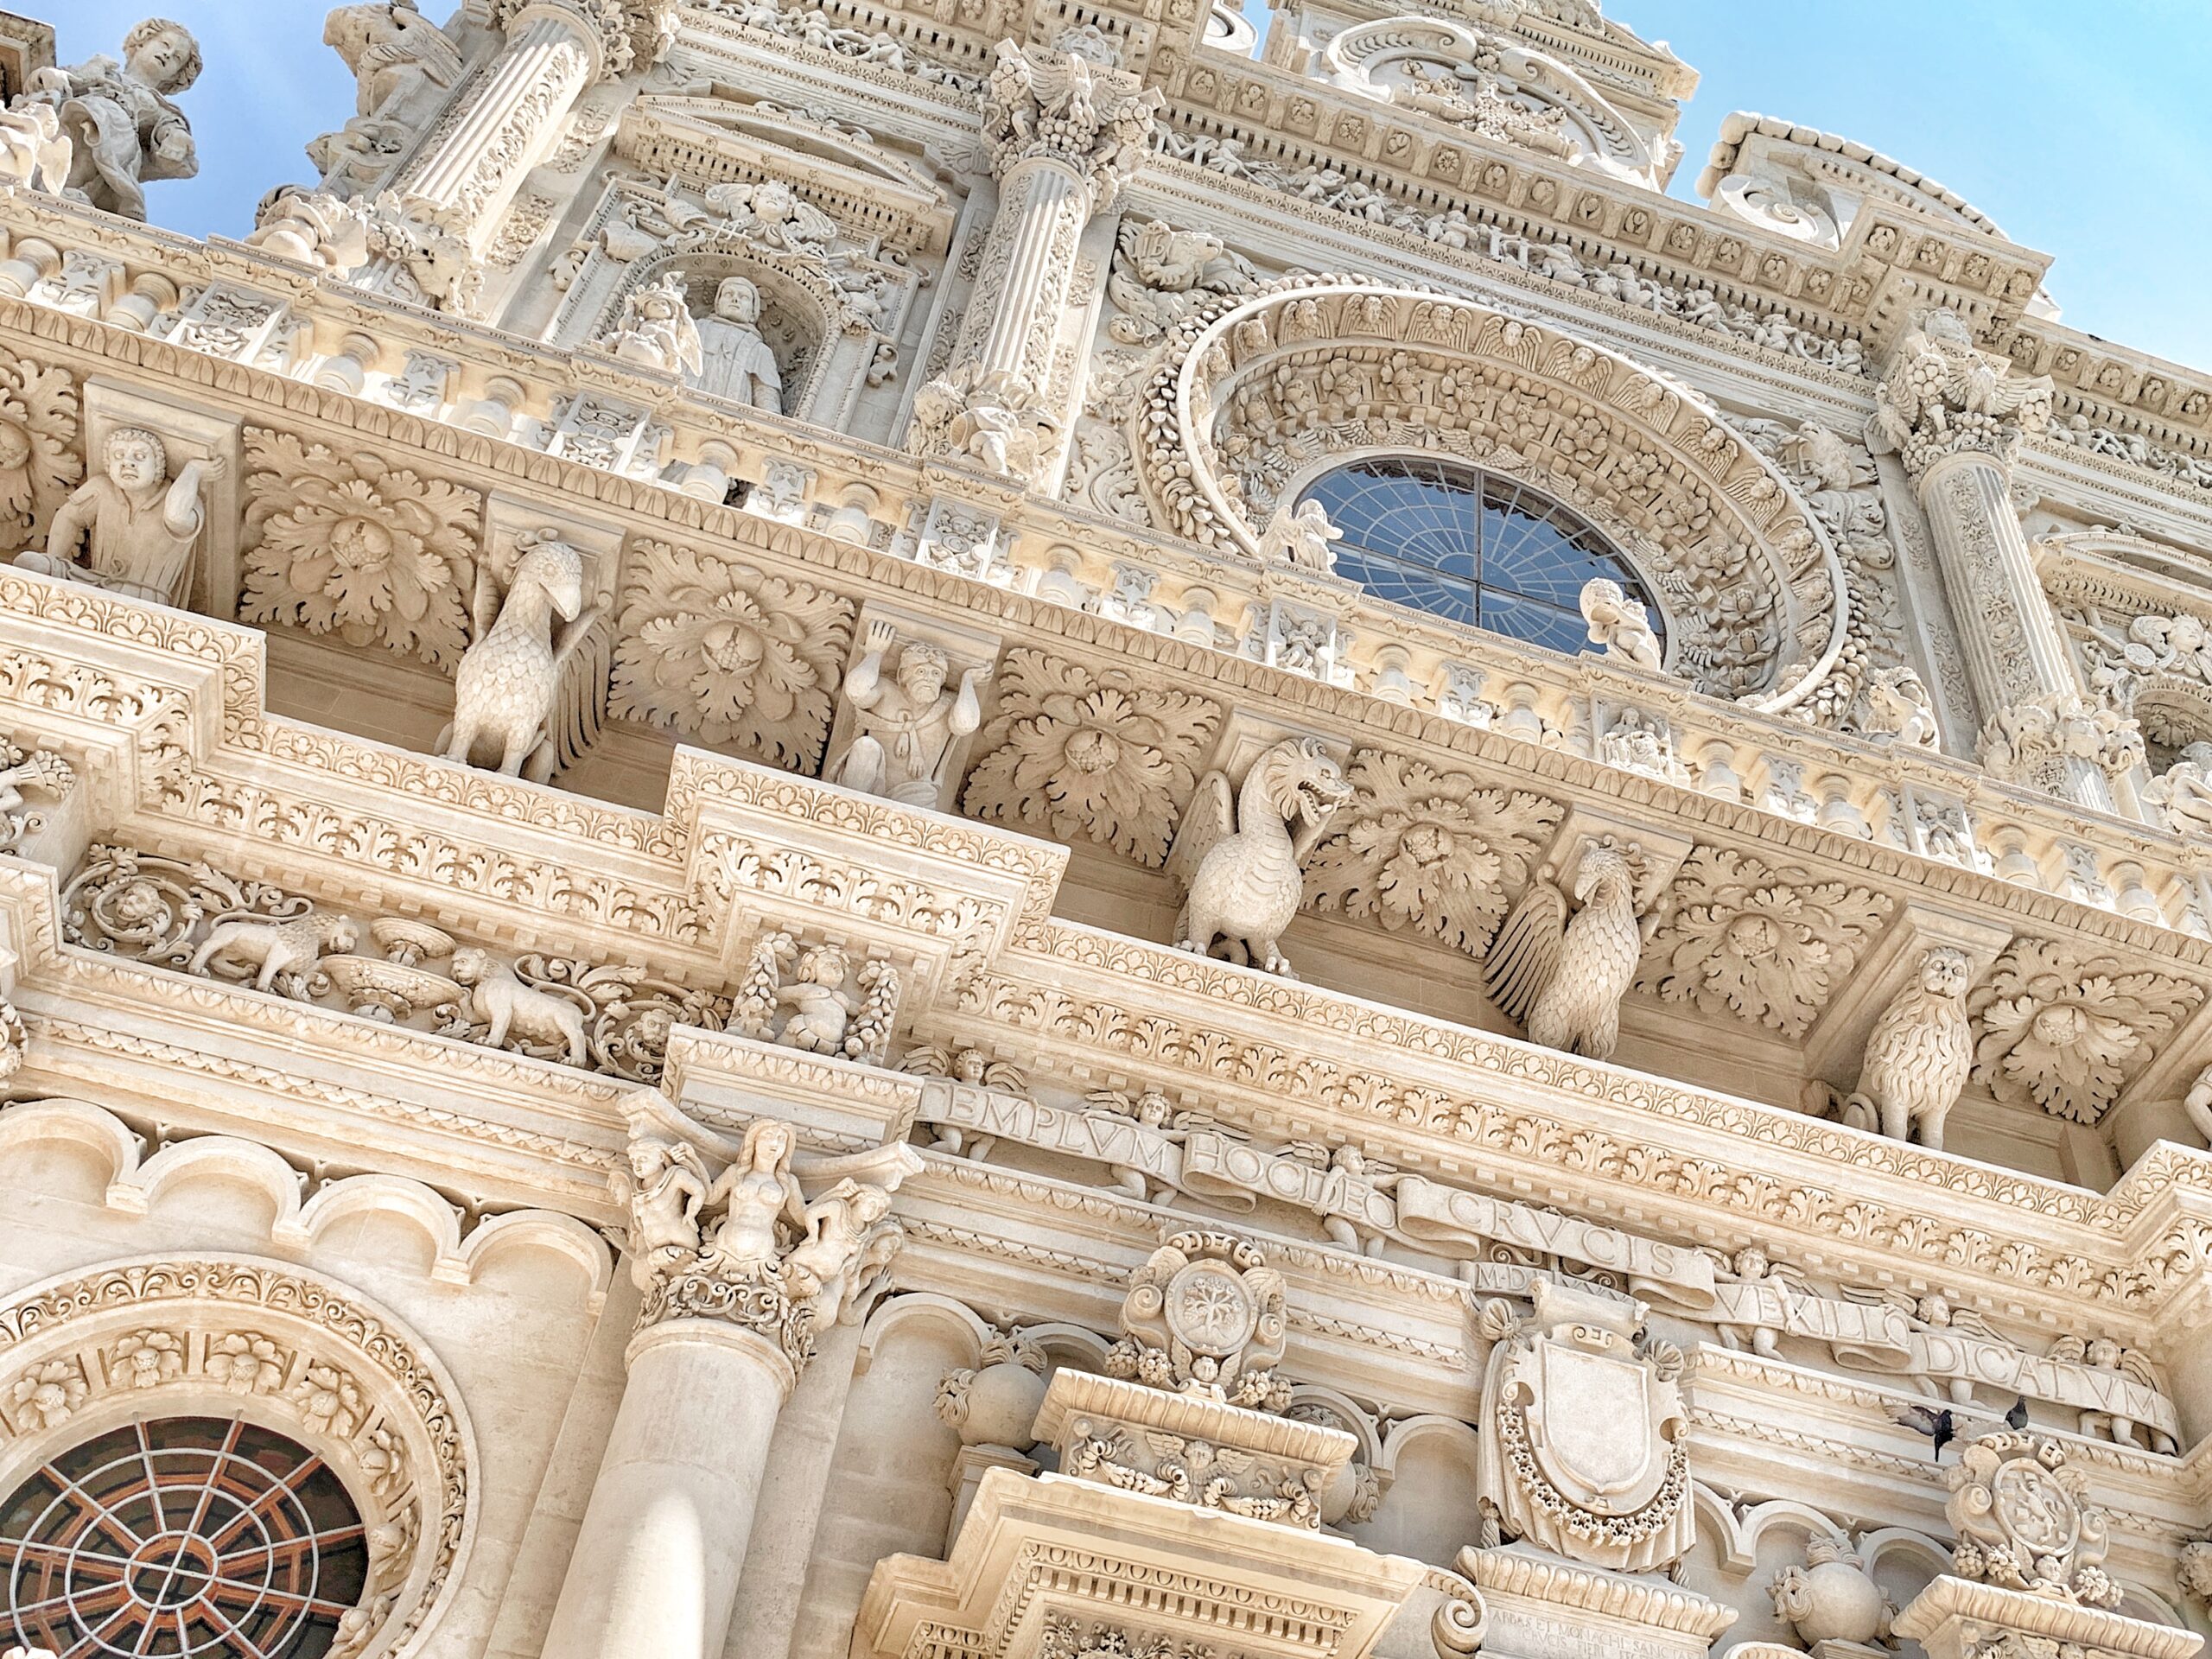 The basilica of Santa Croce in Lecce is one of the best examples of baroque architecture with a stunning baroque facade.